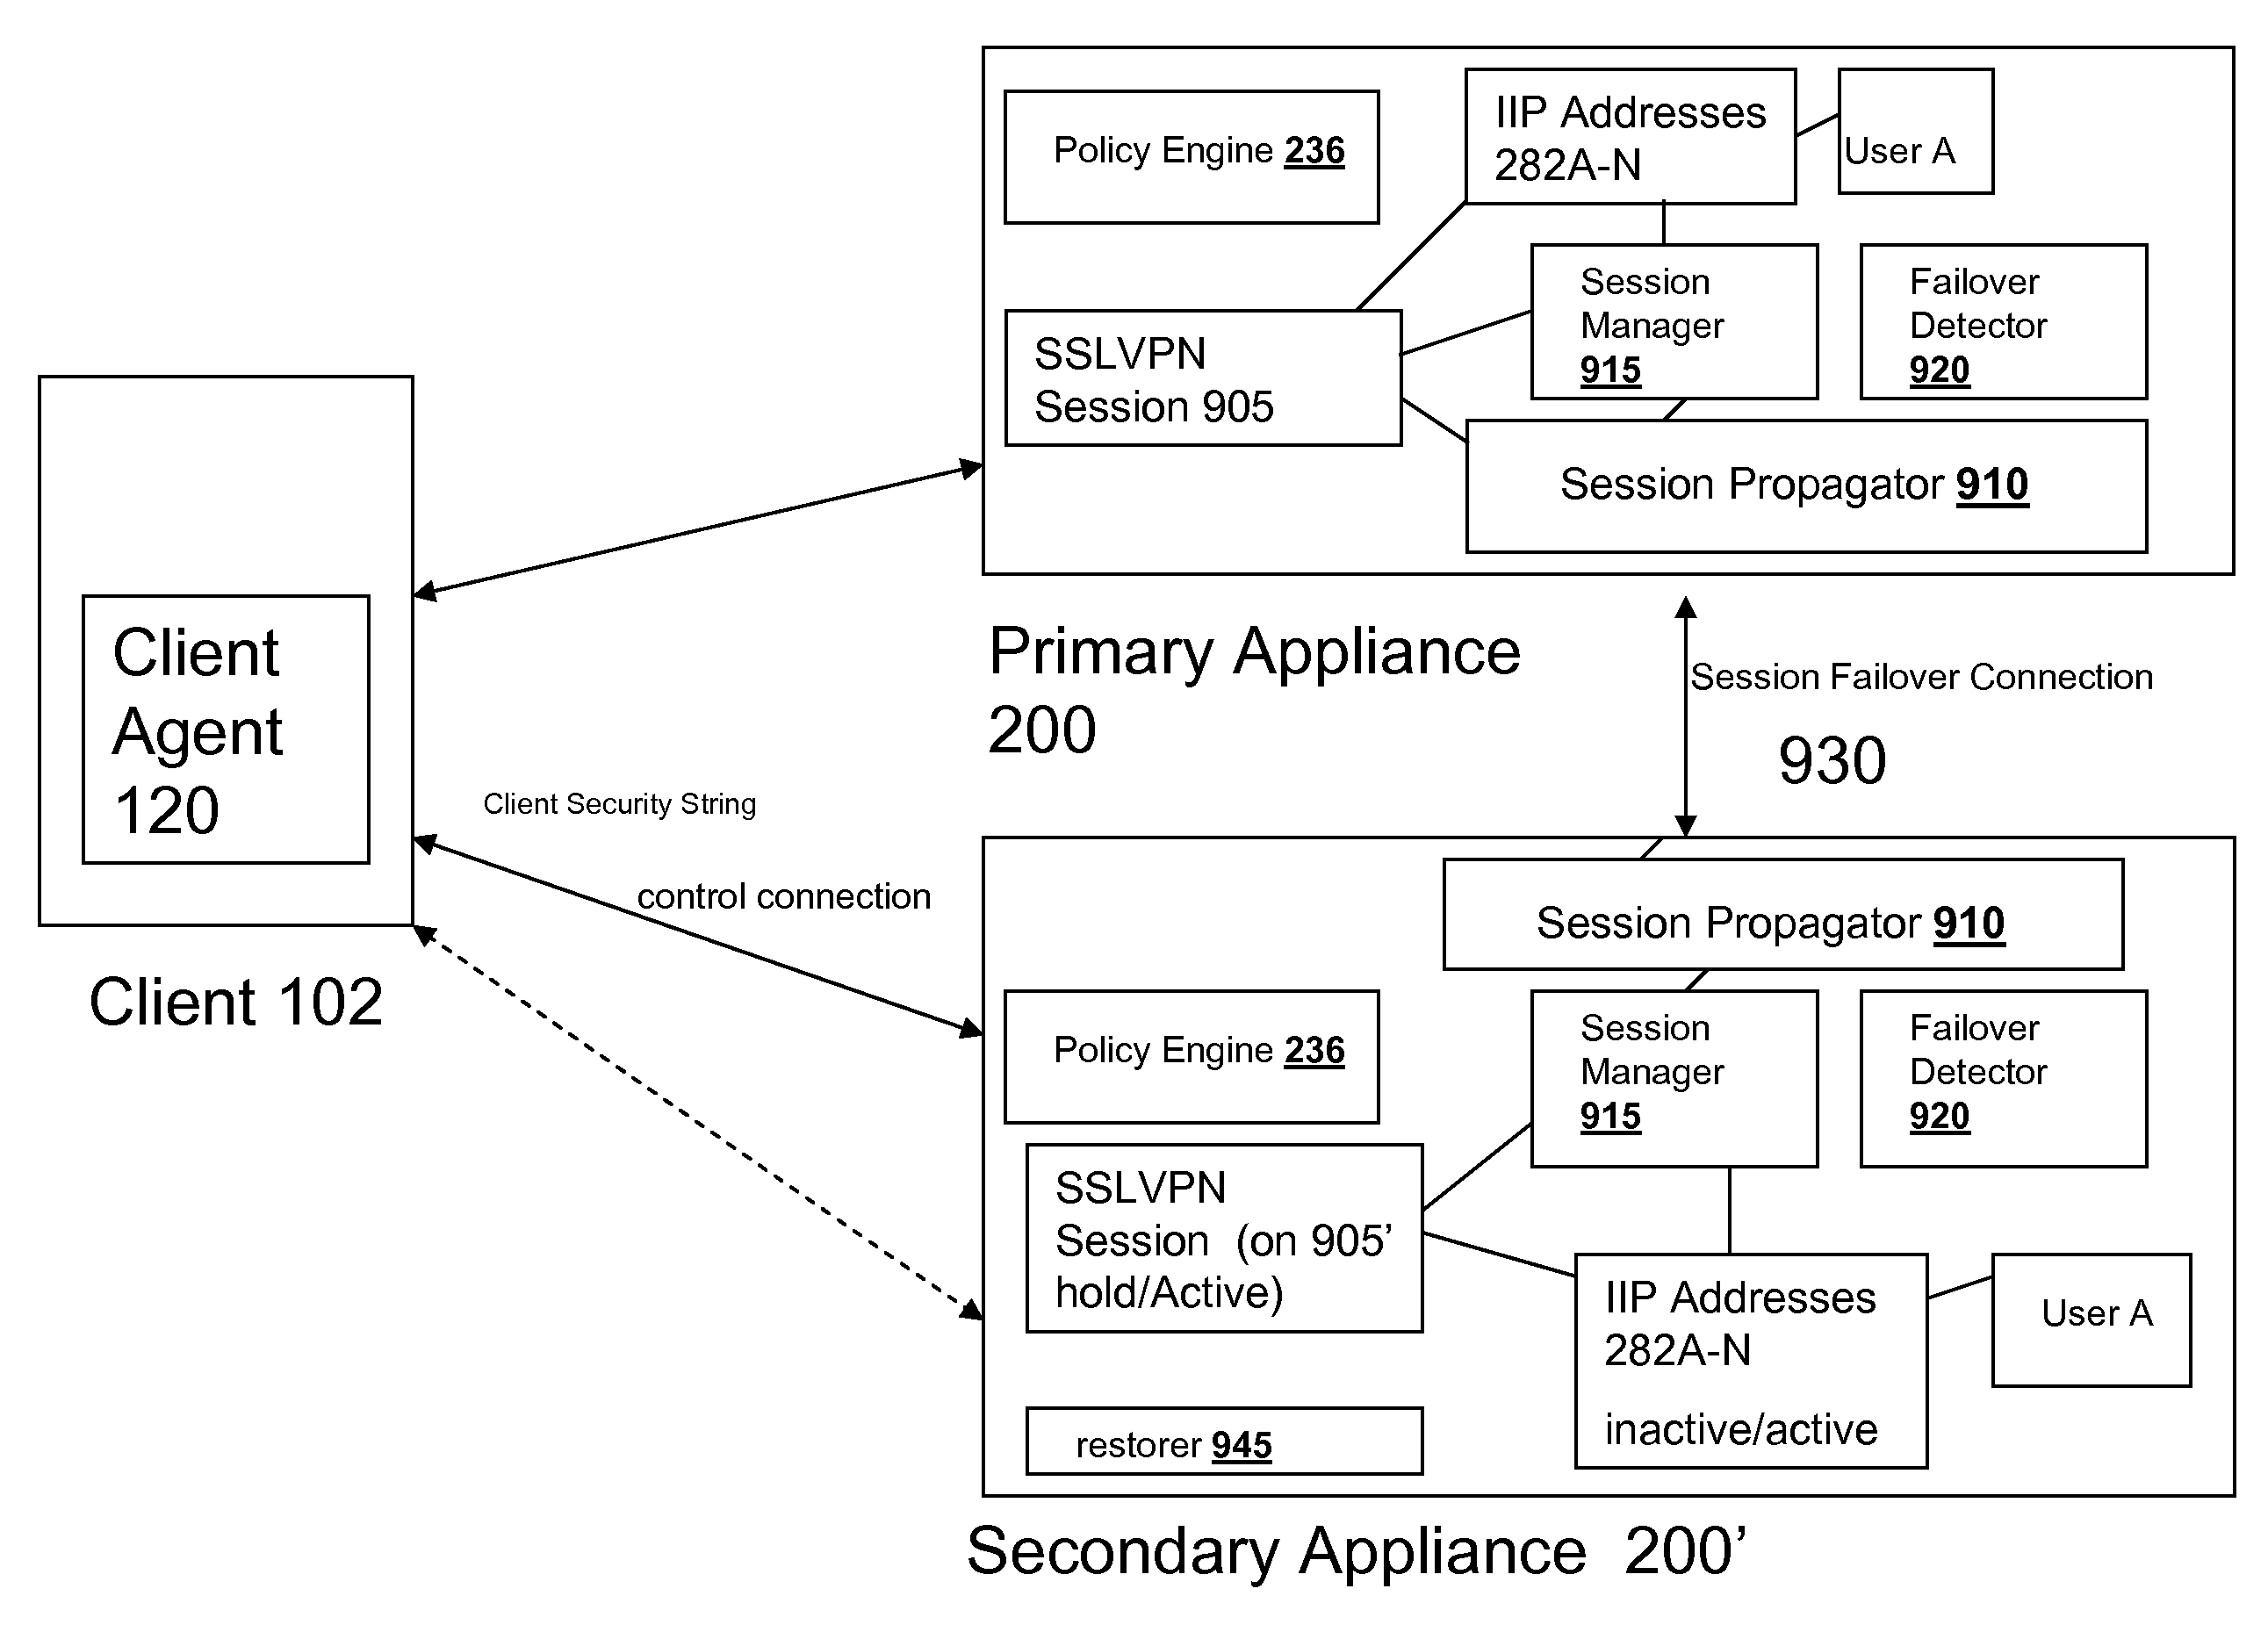 Systems and Methods for Authorizing a Client in an SSL VPN Session Failover Environment